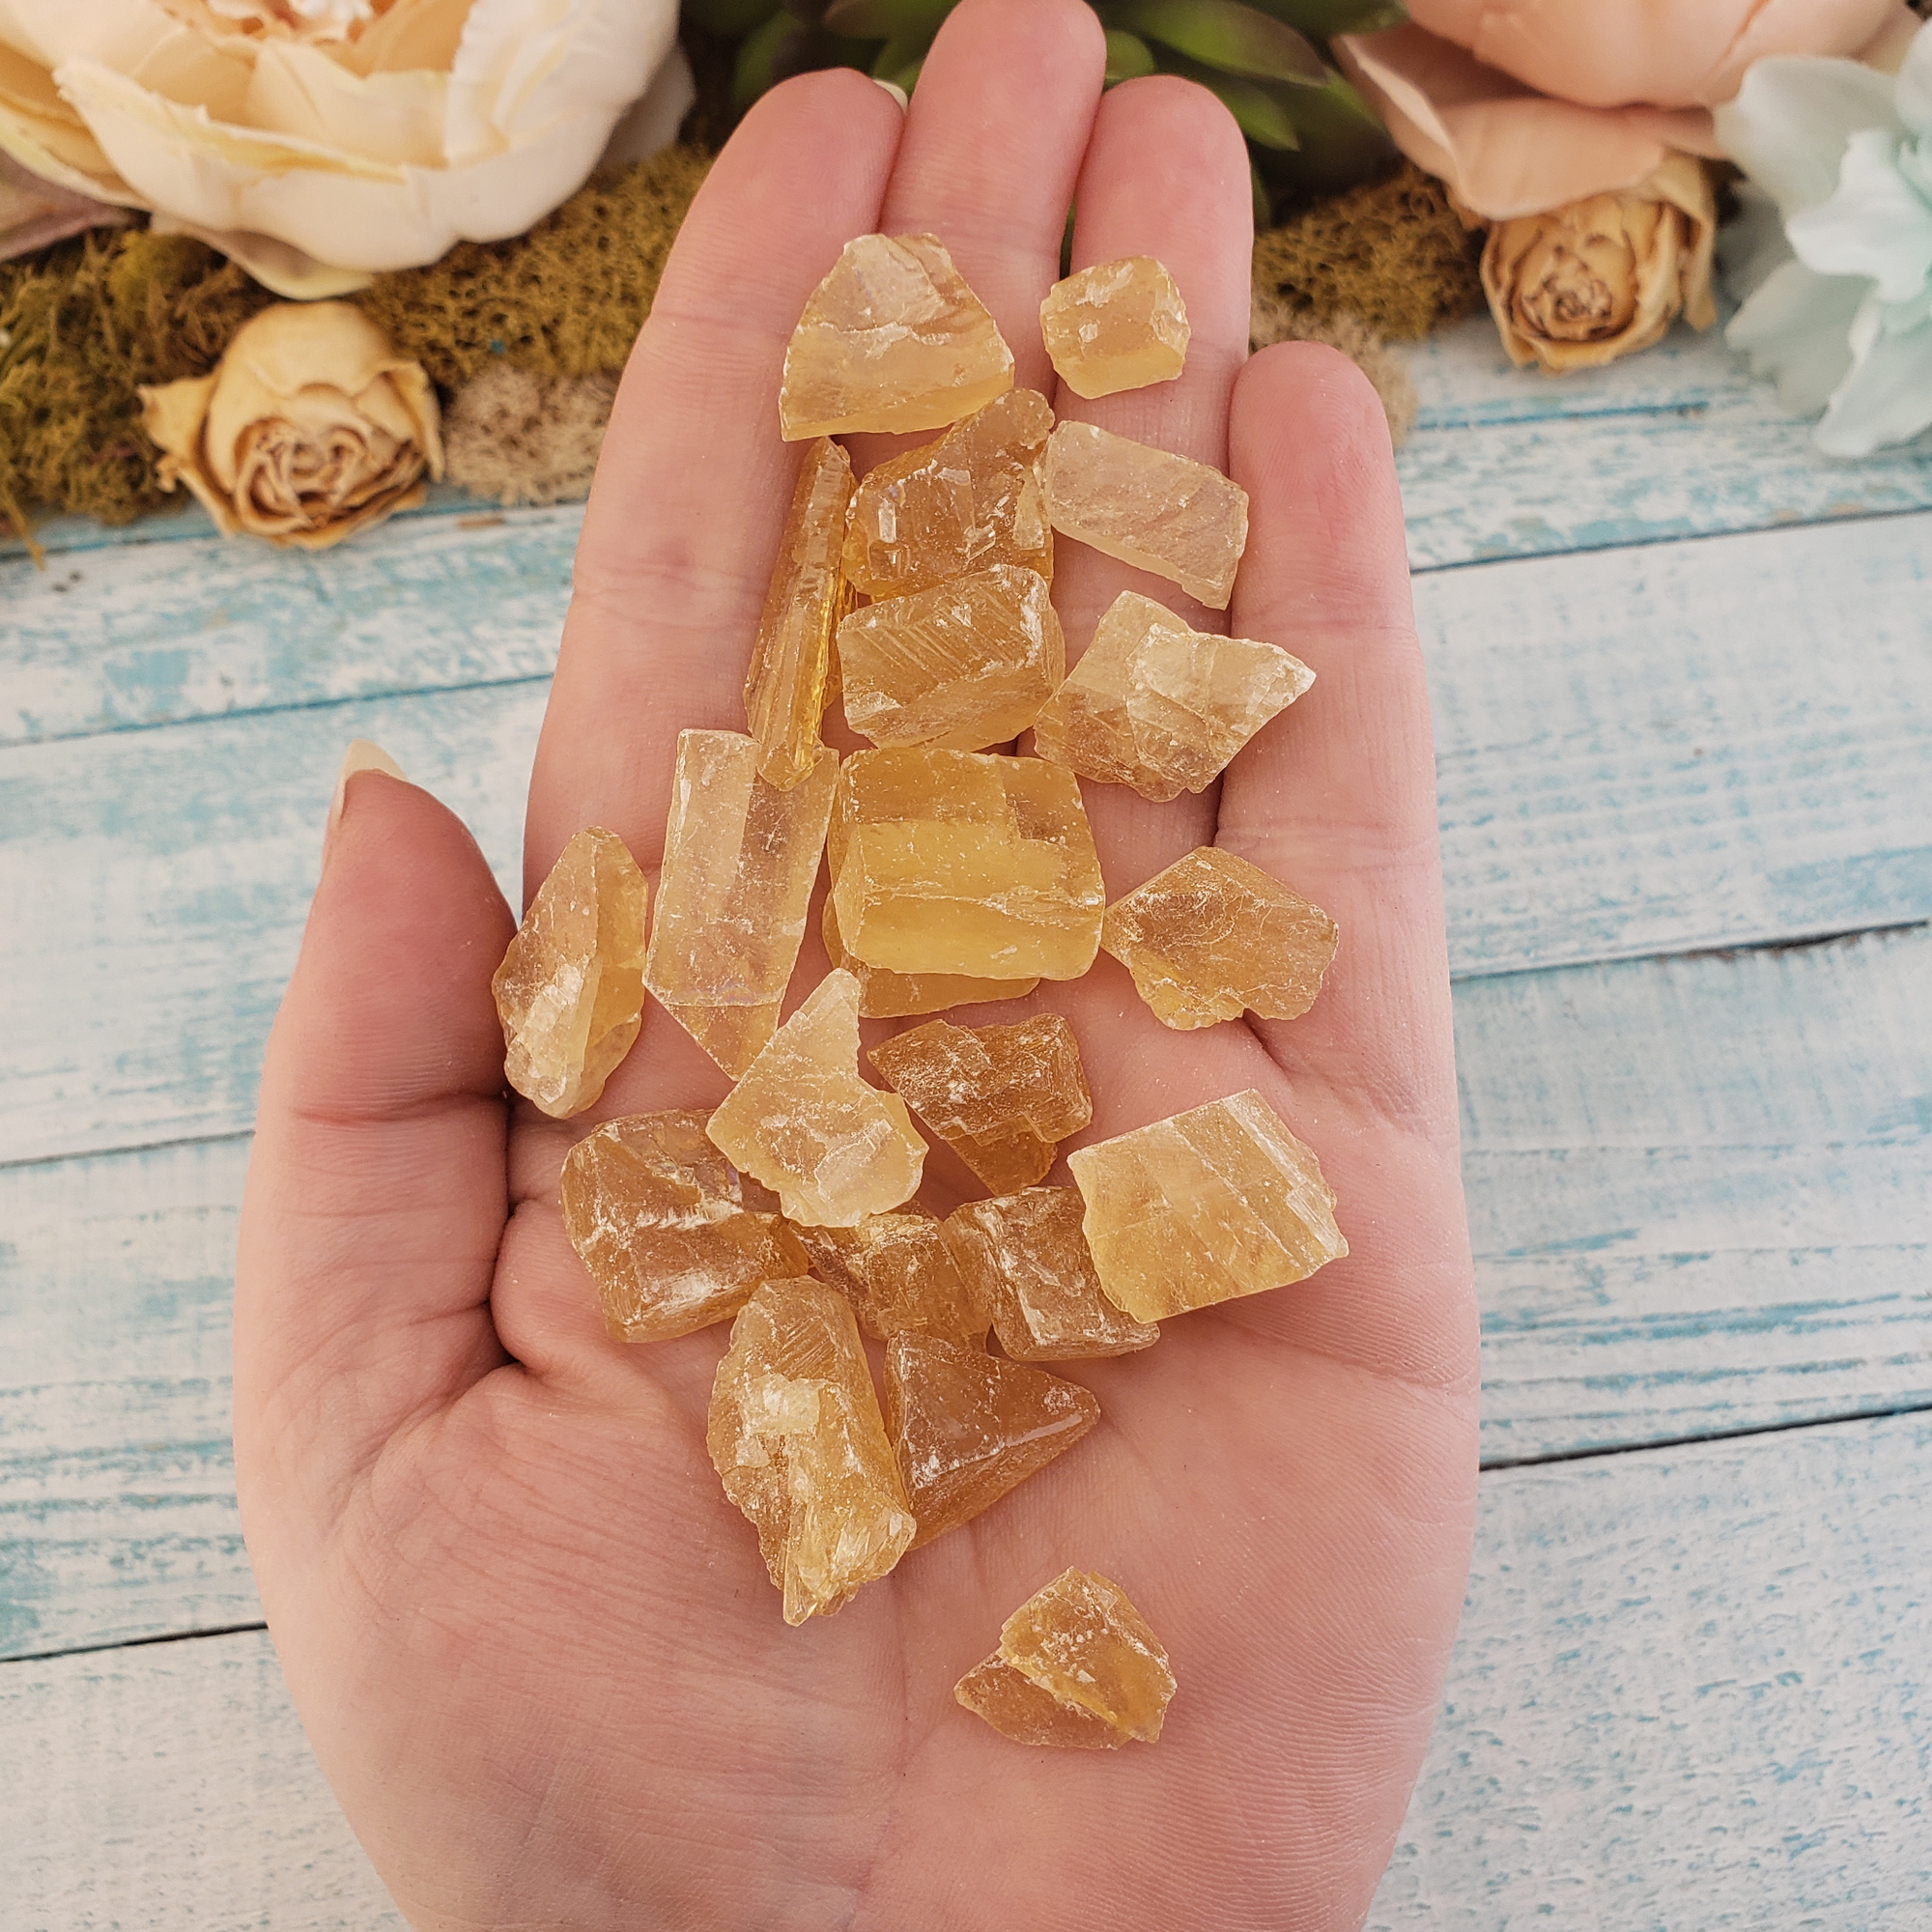 Honey Calcite Natural Raw Crystals Rough Gemstones - 3 Mini Stones - In Hand On Board